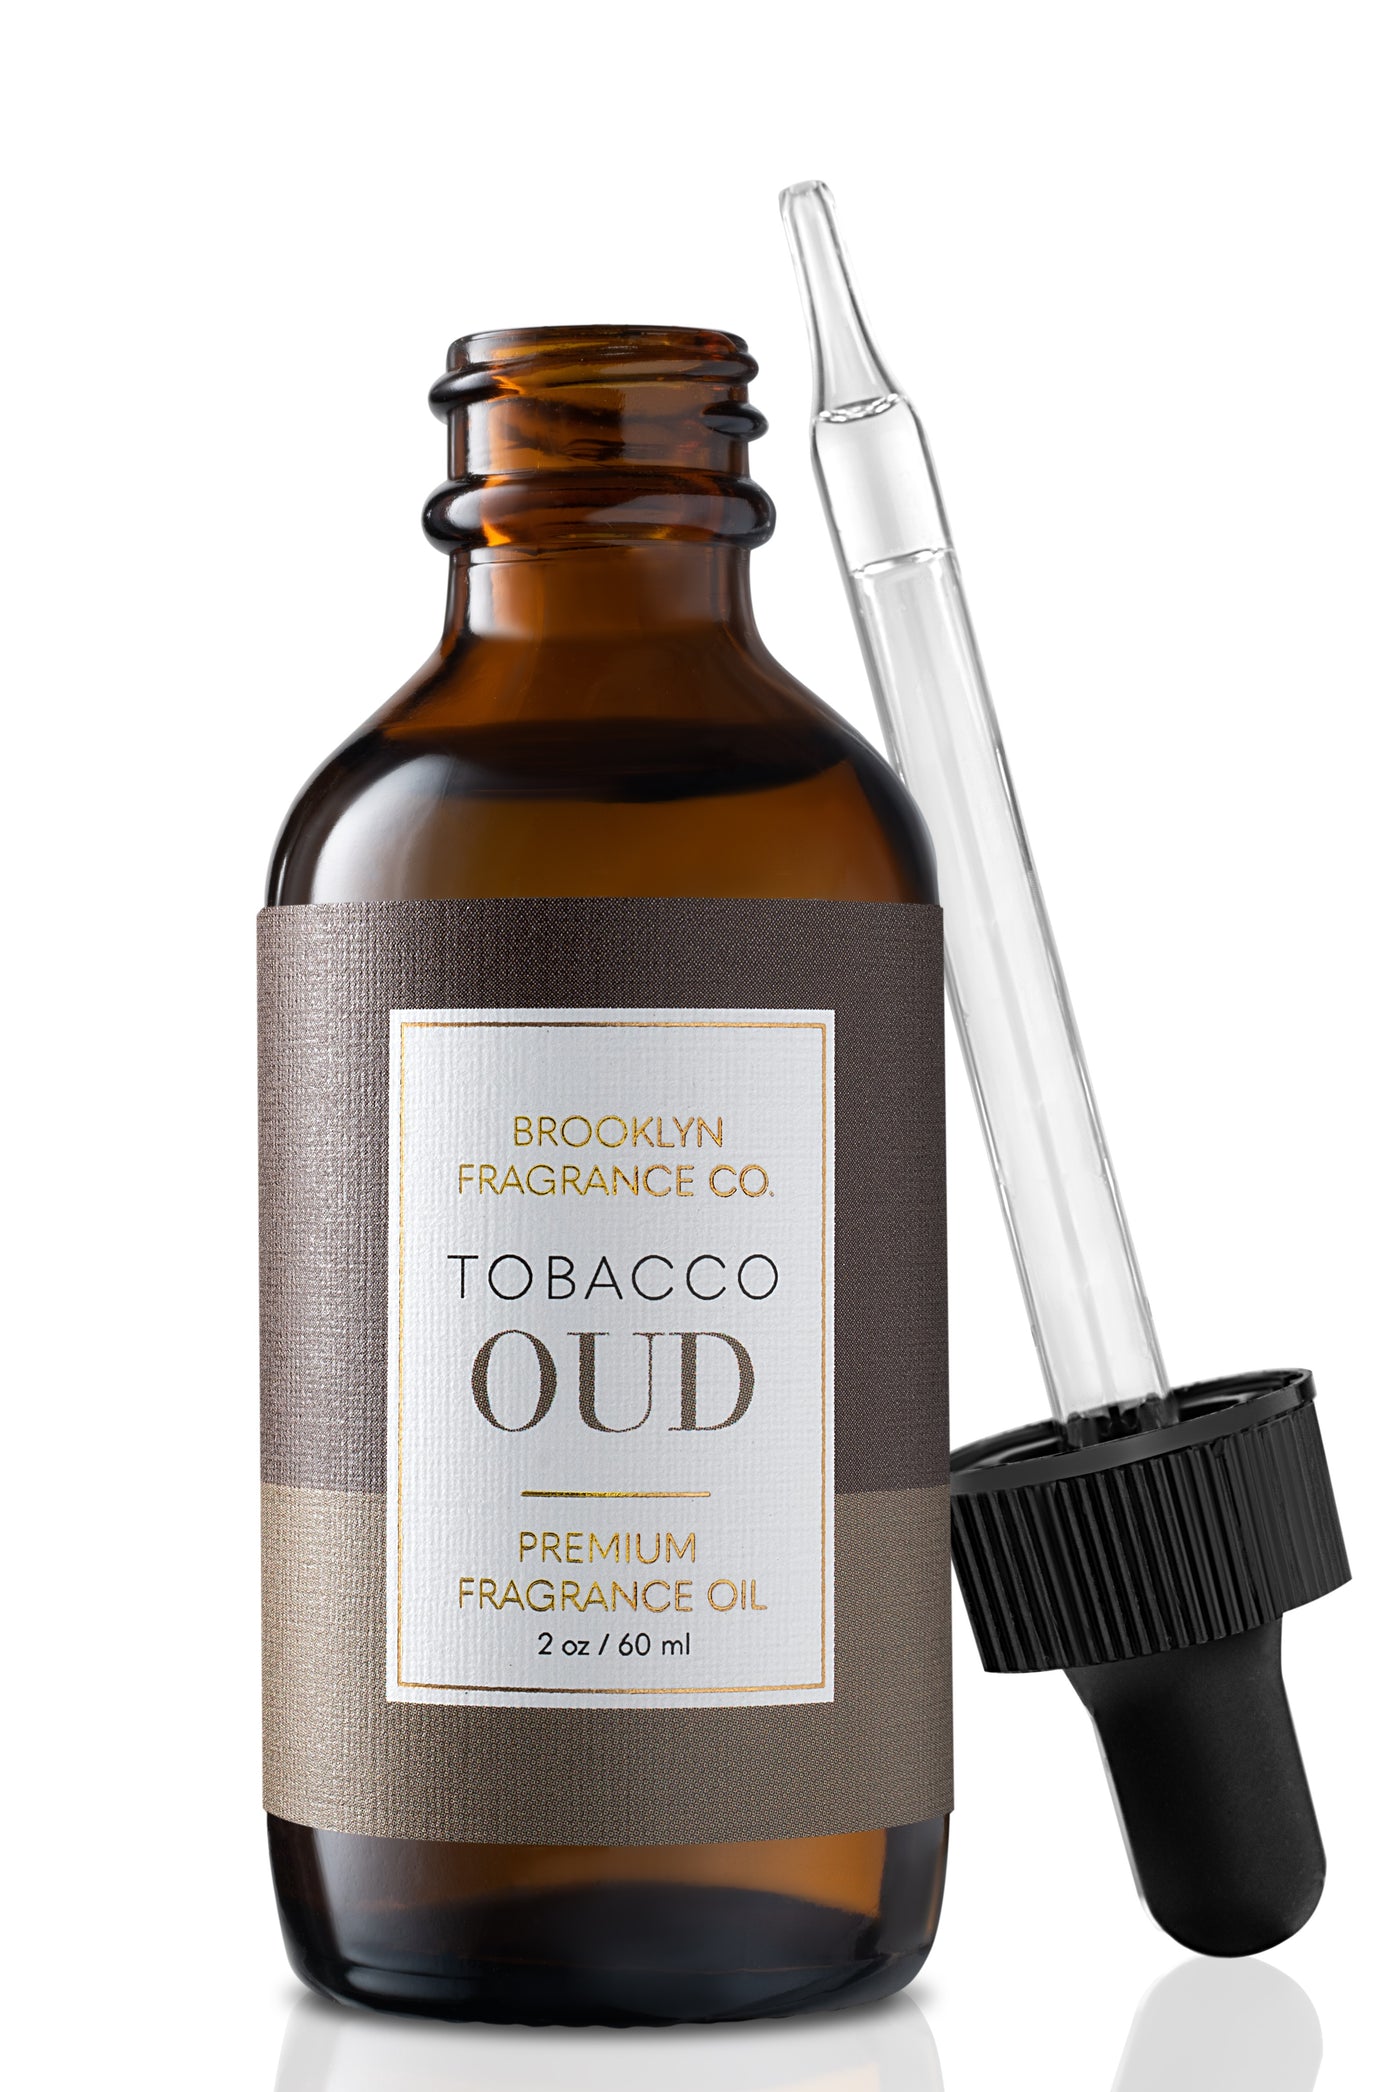  Oud Tobacco Fragrance Oil, MitFlor Single Scented Oil